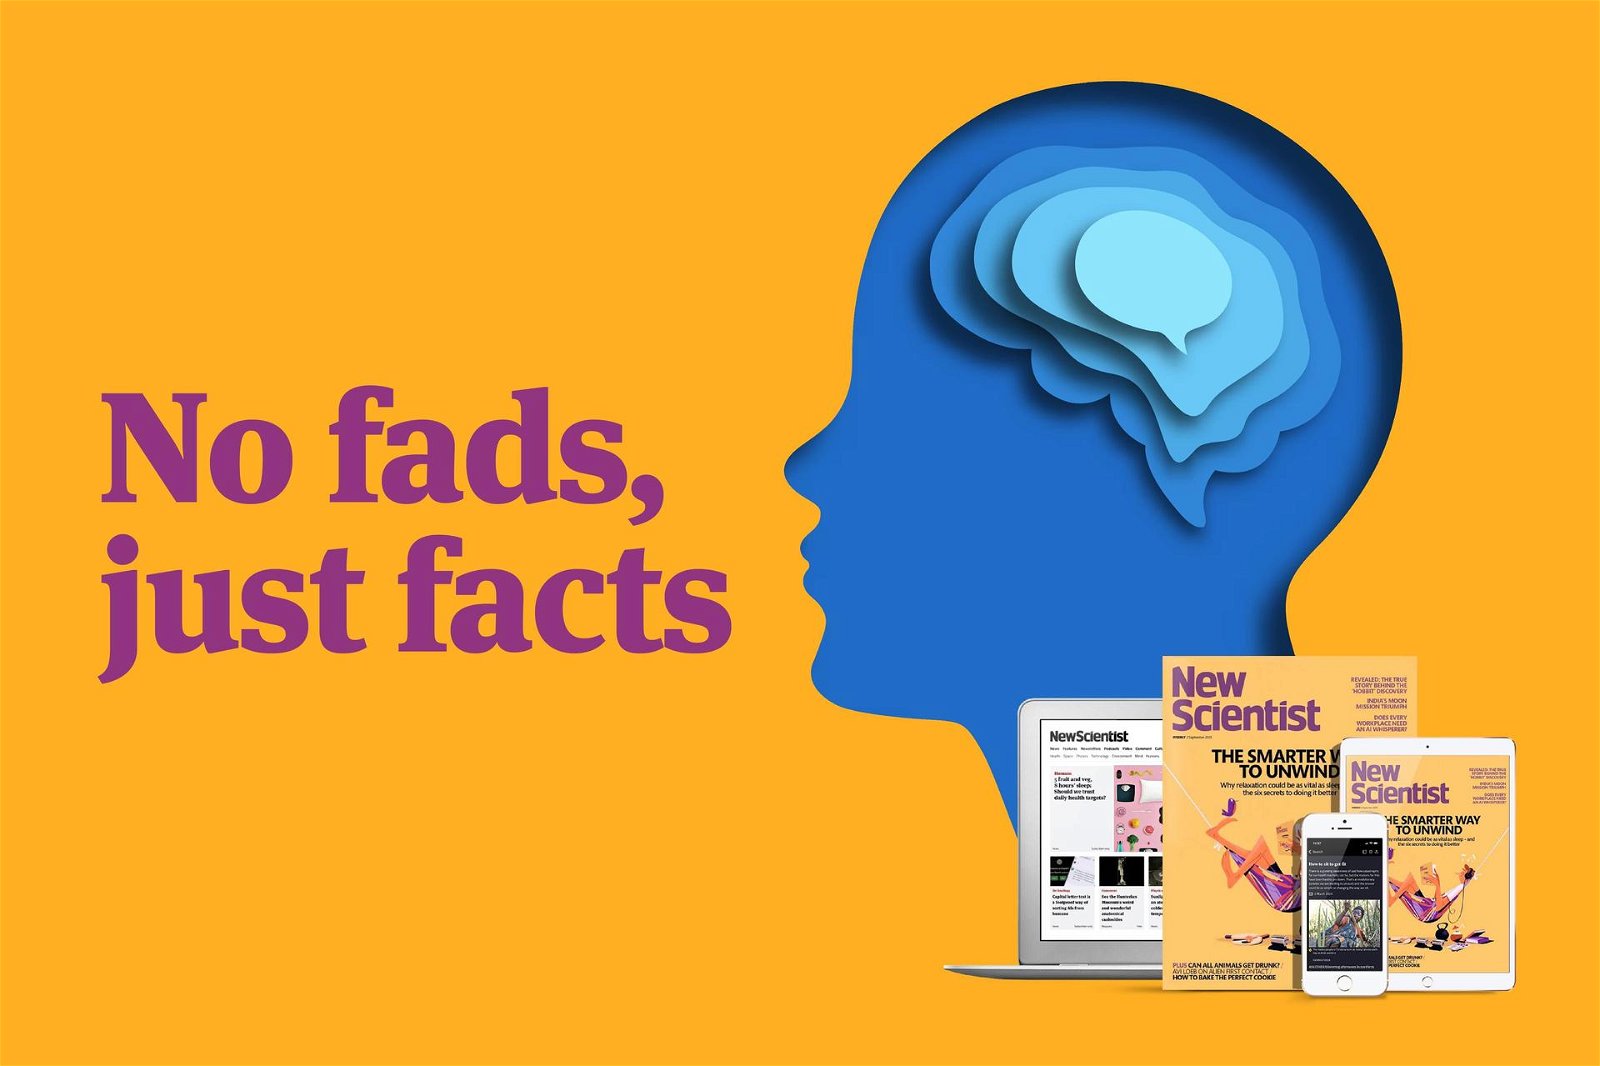 No fads, just facts. Image leads to articles page.